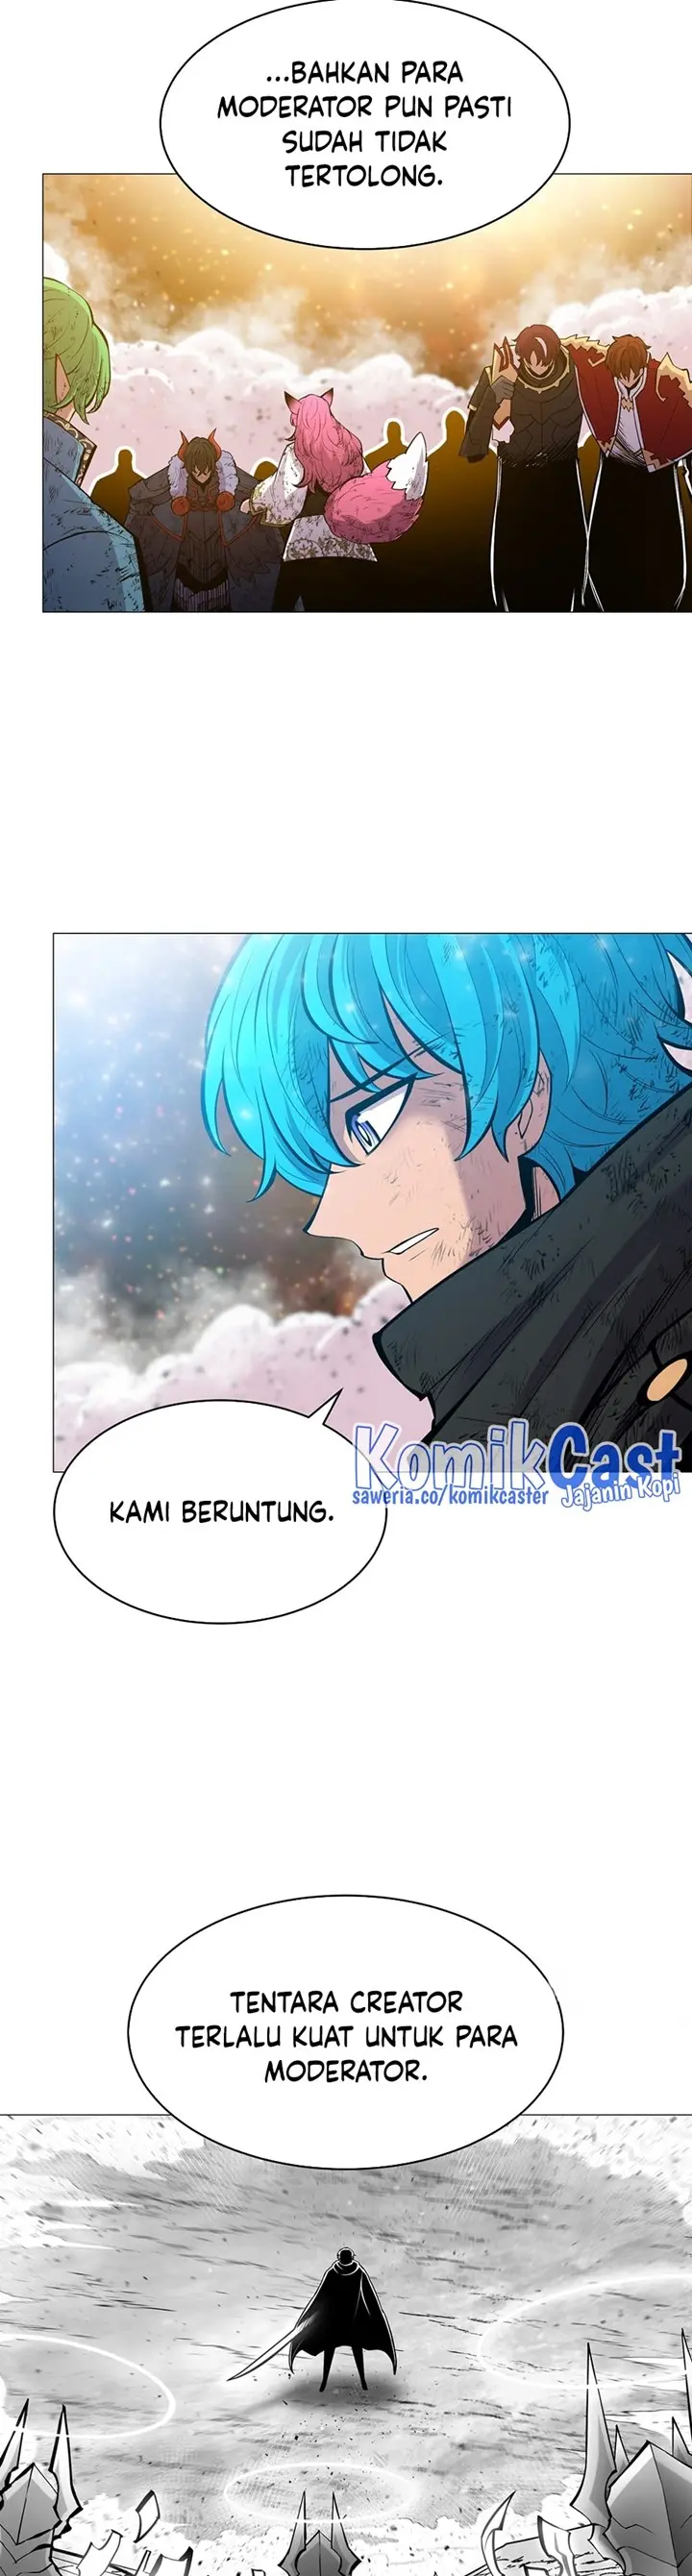 Updater Chapter 114 - 291